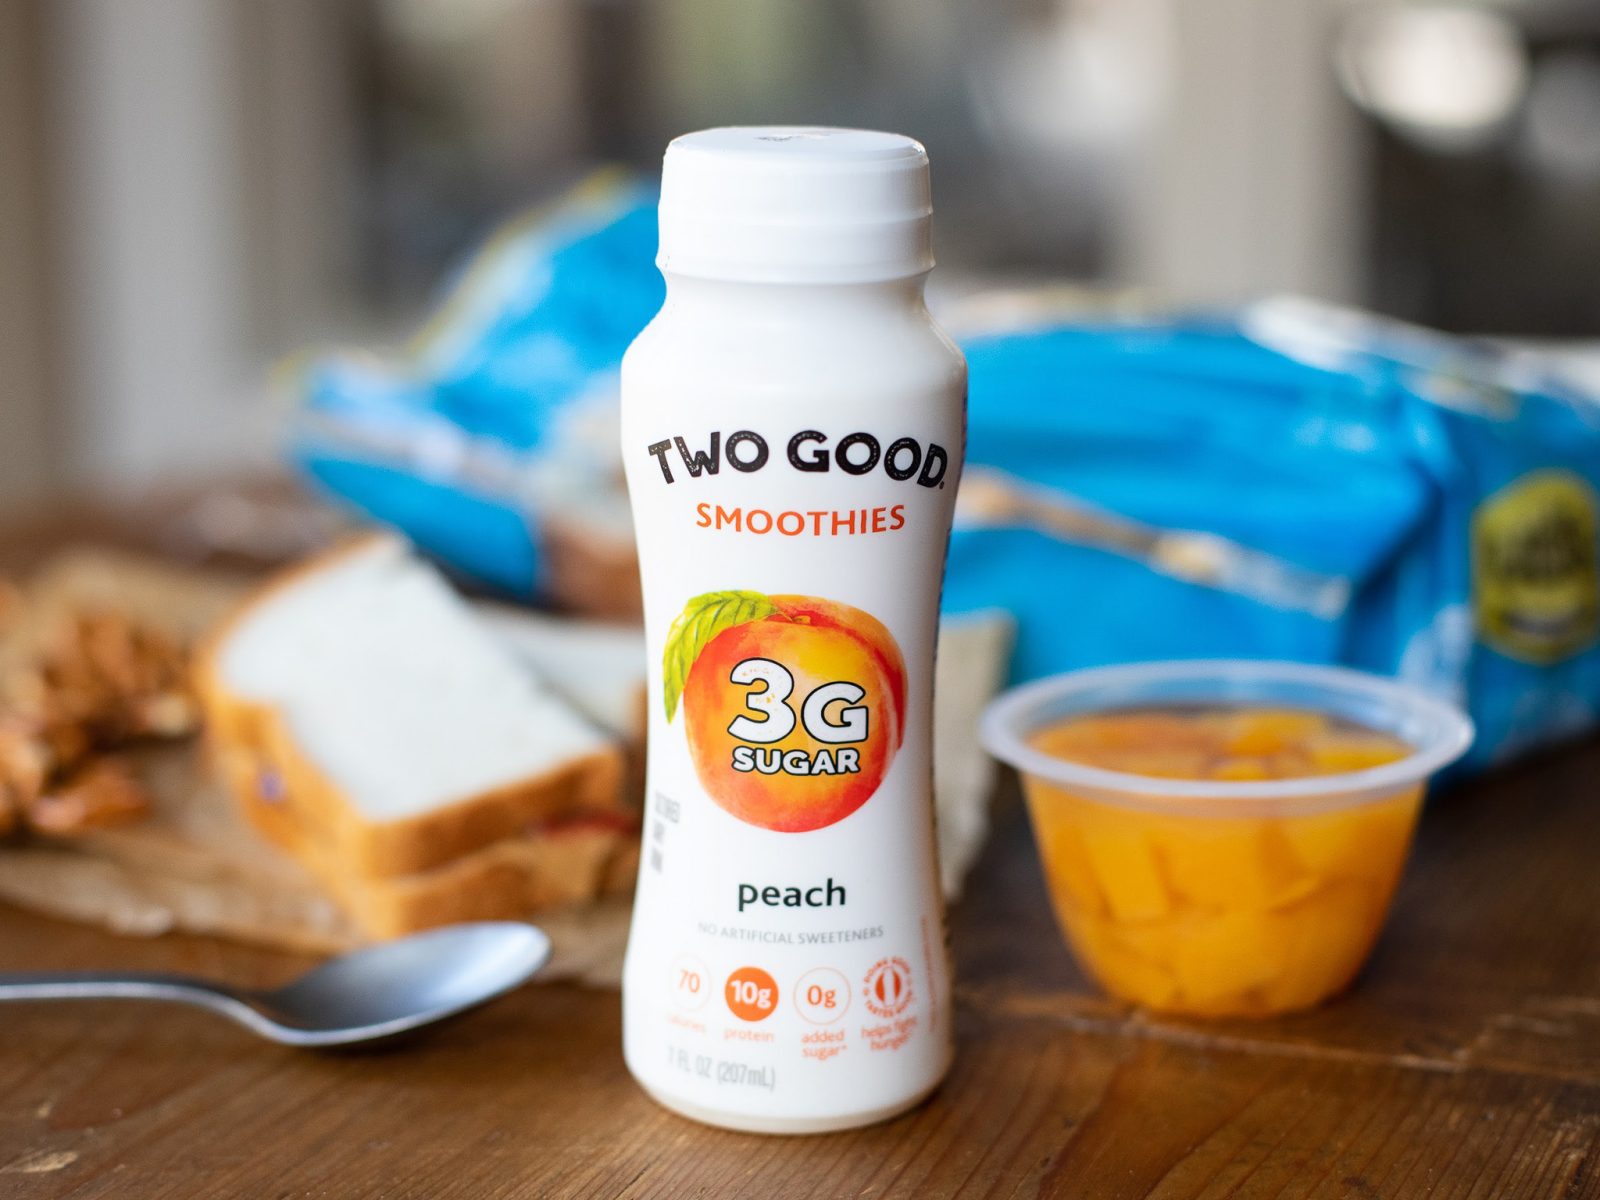 Get Two Good Smoothies For 89¢ At Kroger